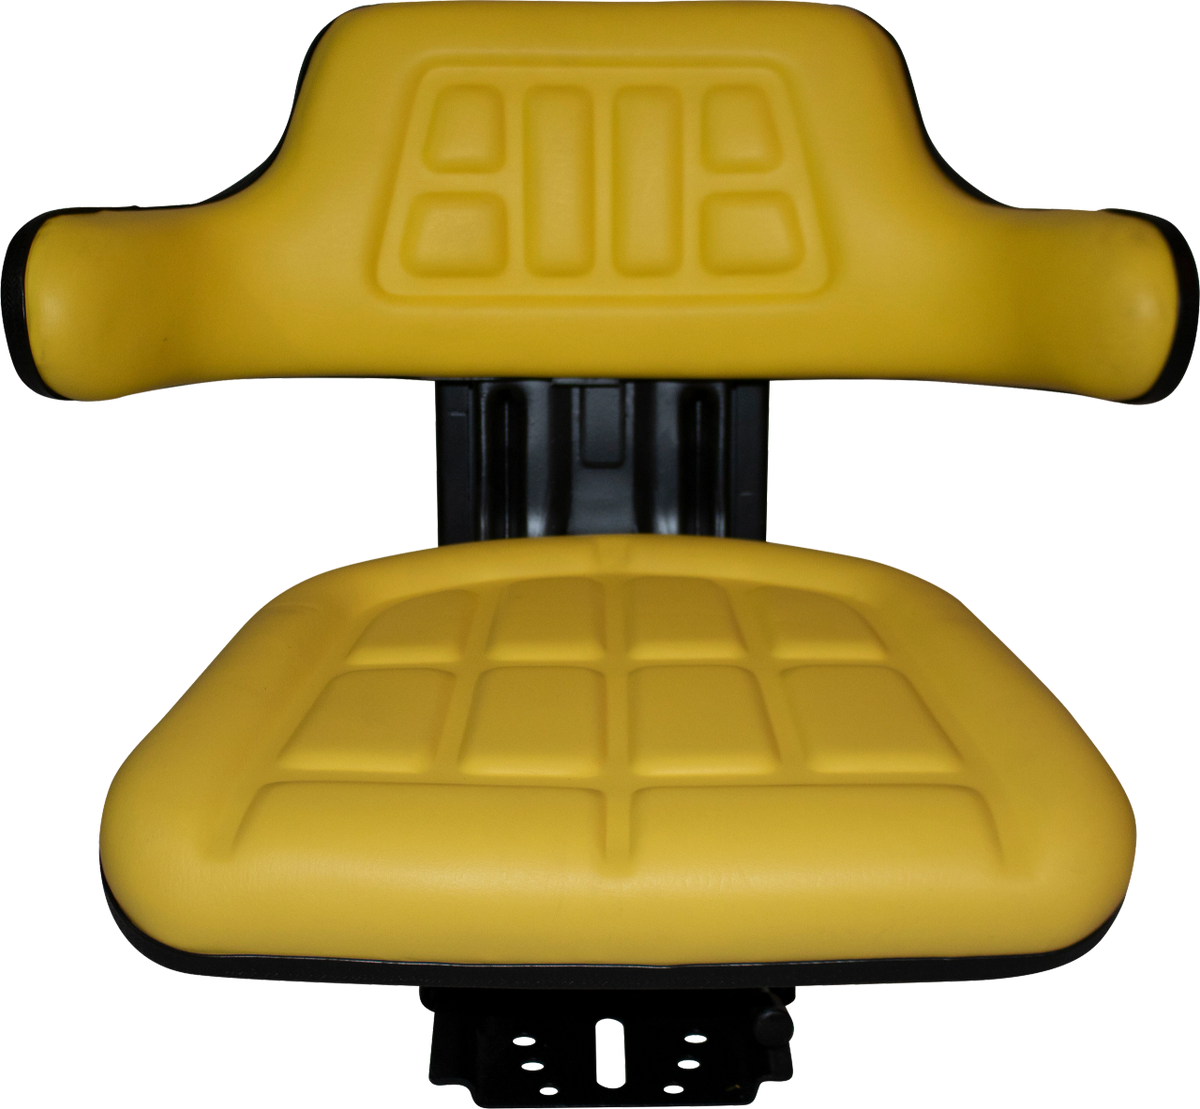 TRAC SEATS YELLOW WAFFLE STYLE JOHN DEERE TRACTOR SEAT FITS 2530